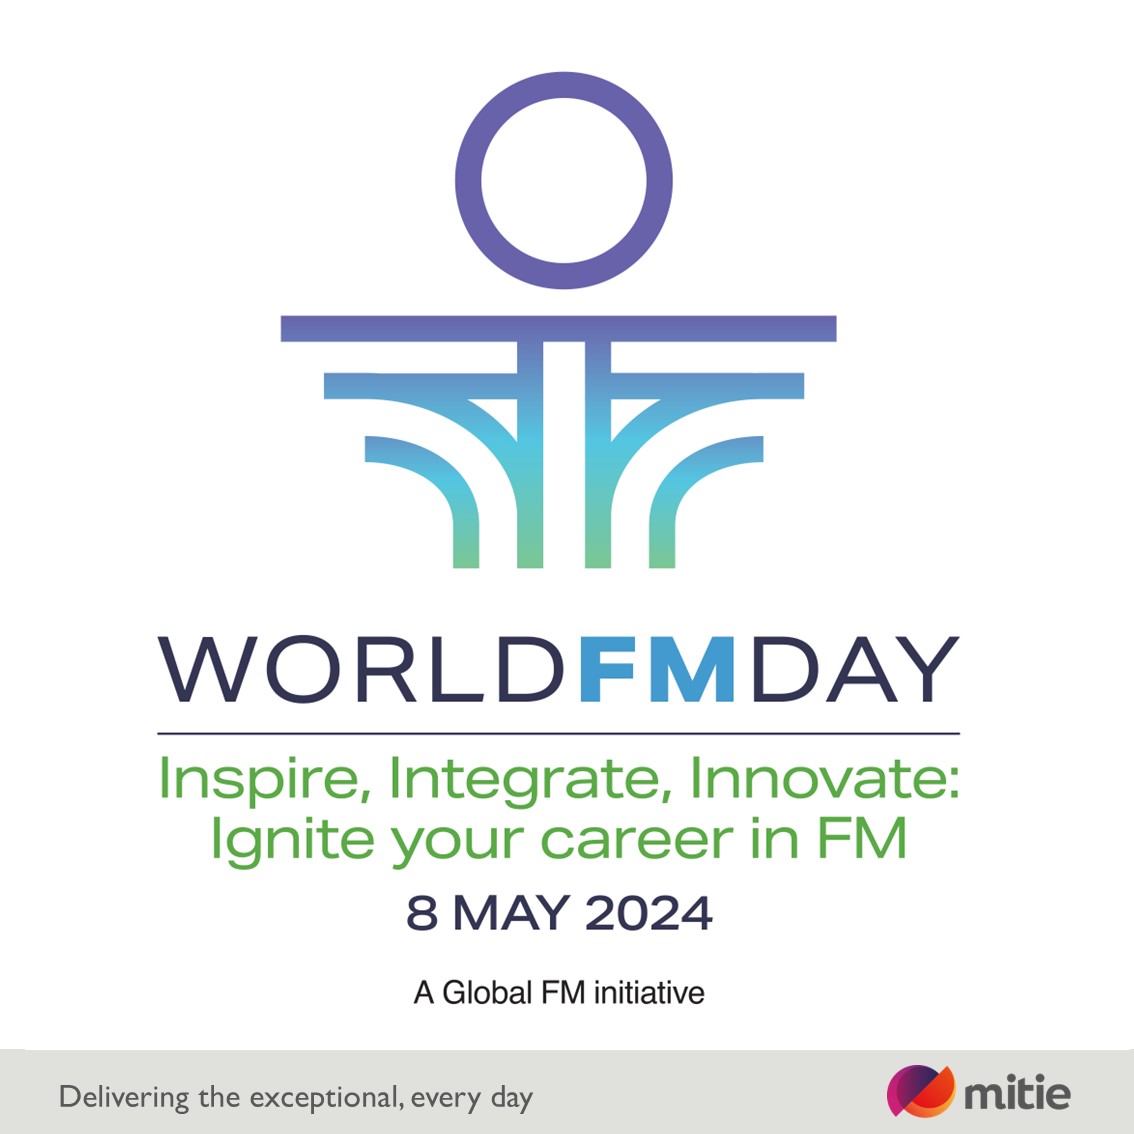 Today is #WorldFMDay which celebrates the vital role of facility management professionals worldwide. It’s a time to celebrate the behind-the-scenes heroes of the built environment. A massive thank you to all our Mitie colleagues who deliver the #ExceptionalEveryDay.